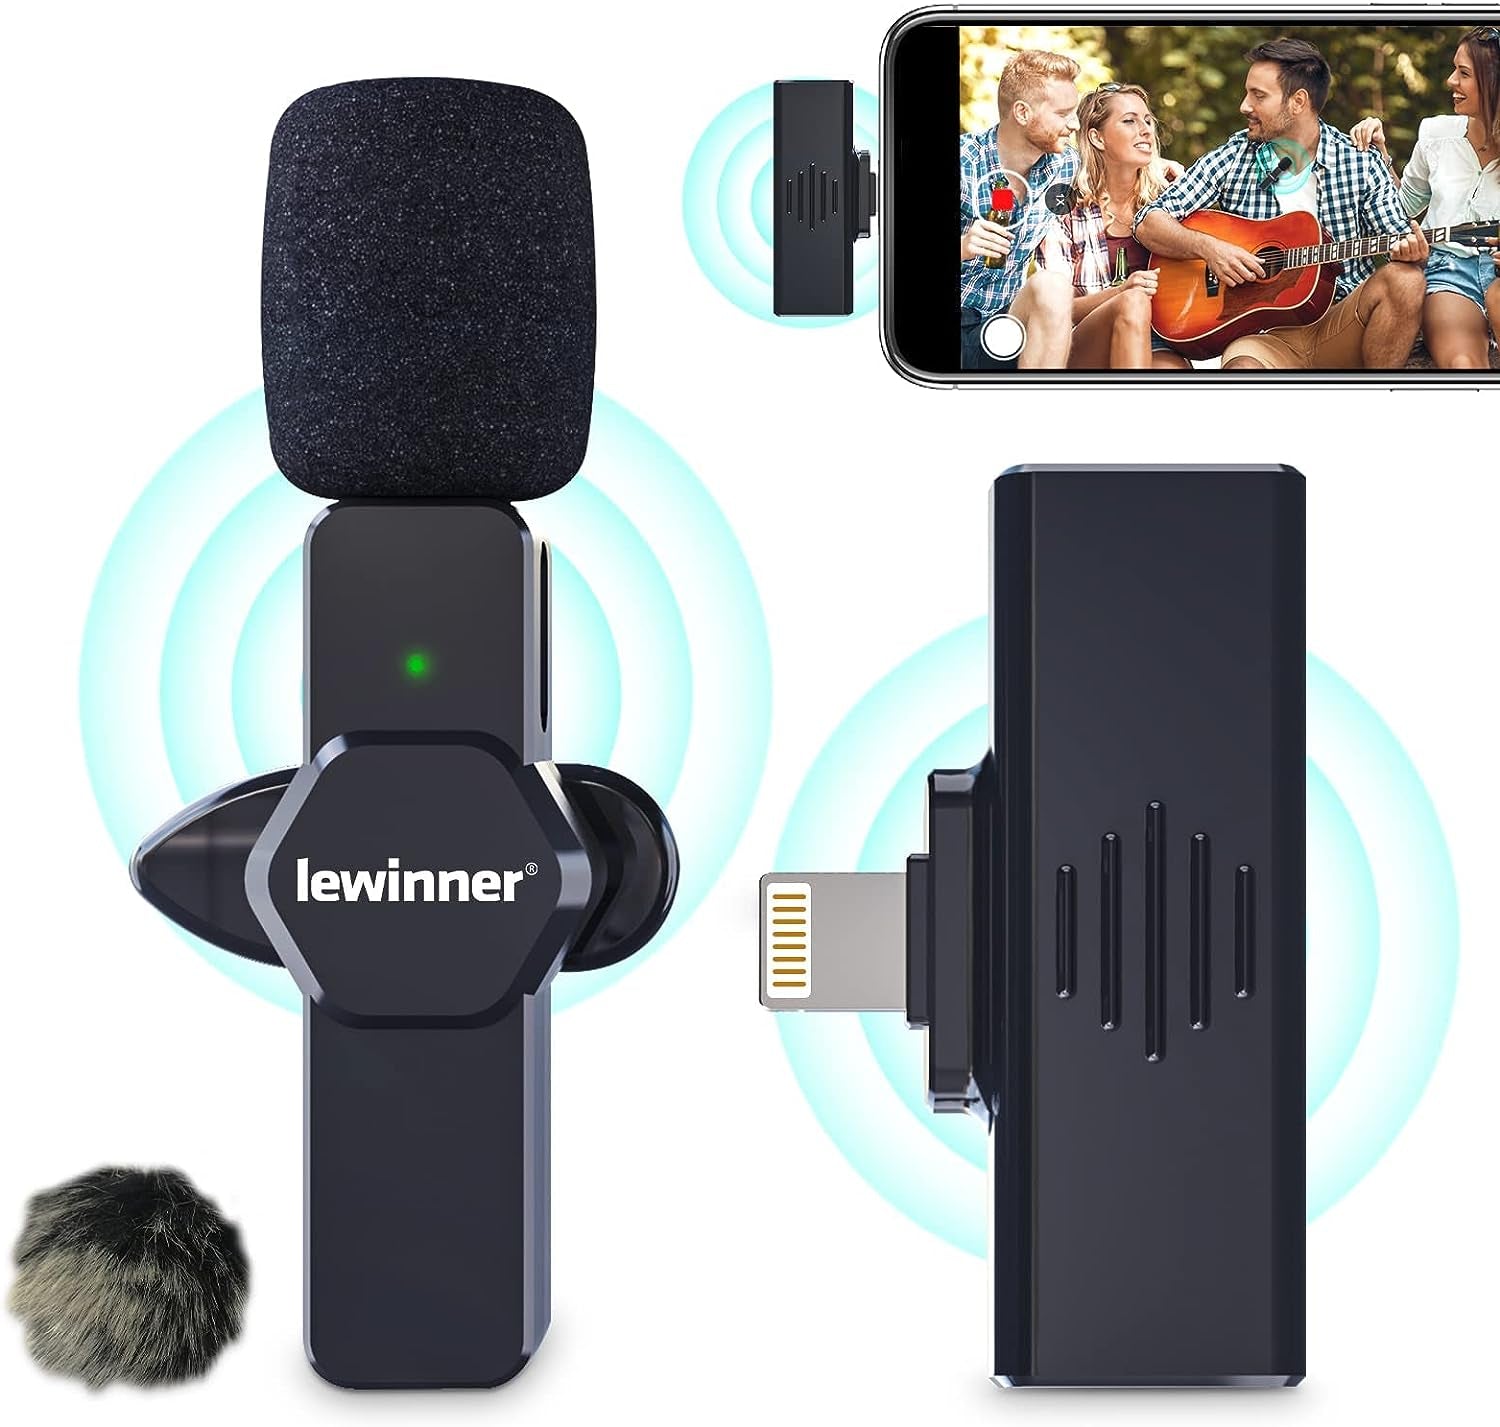 Wireless Lavalier Microphone for iPhone - Everyday-Sales.com